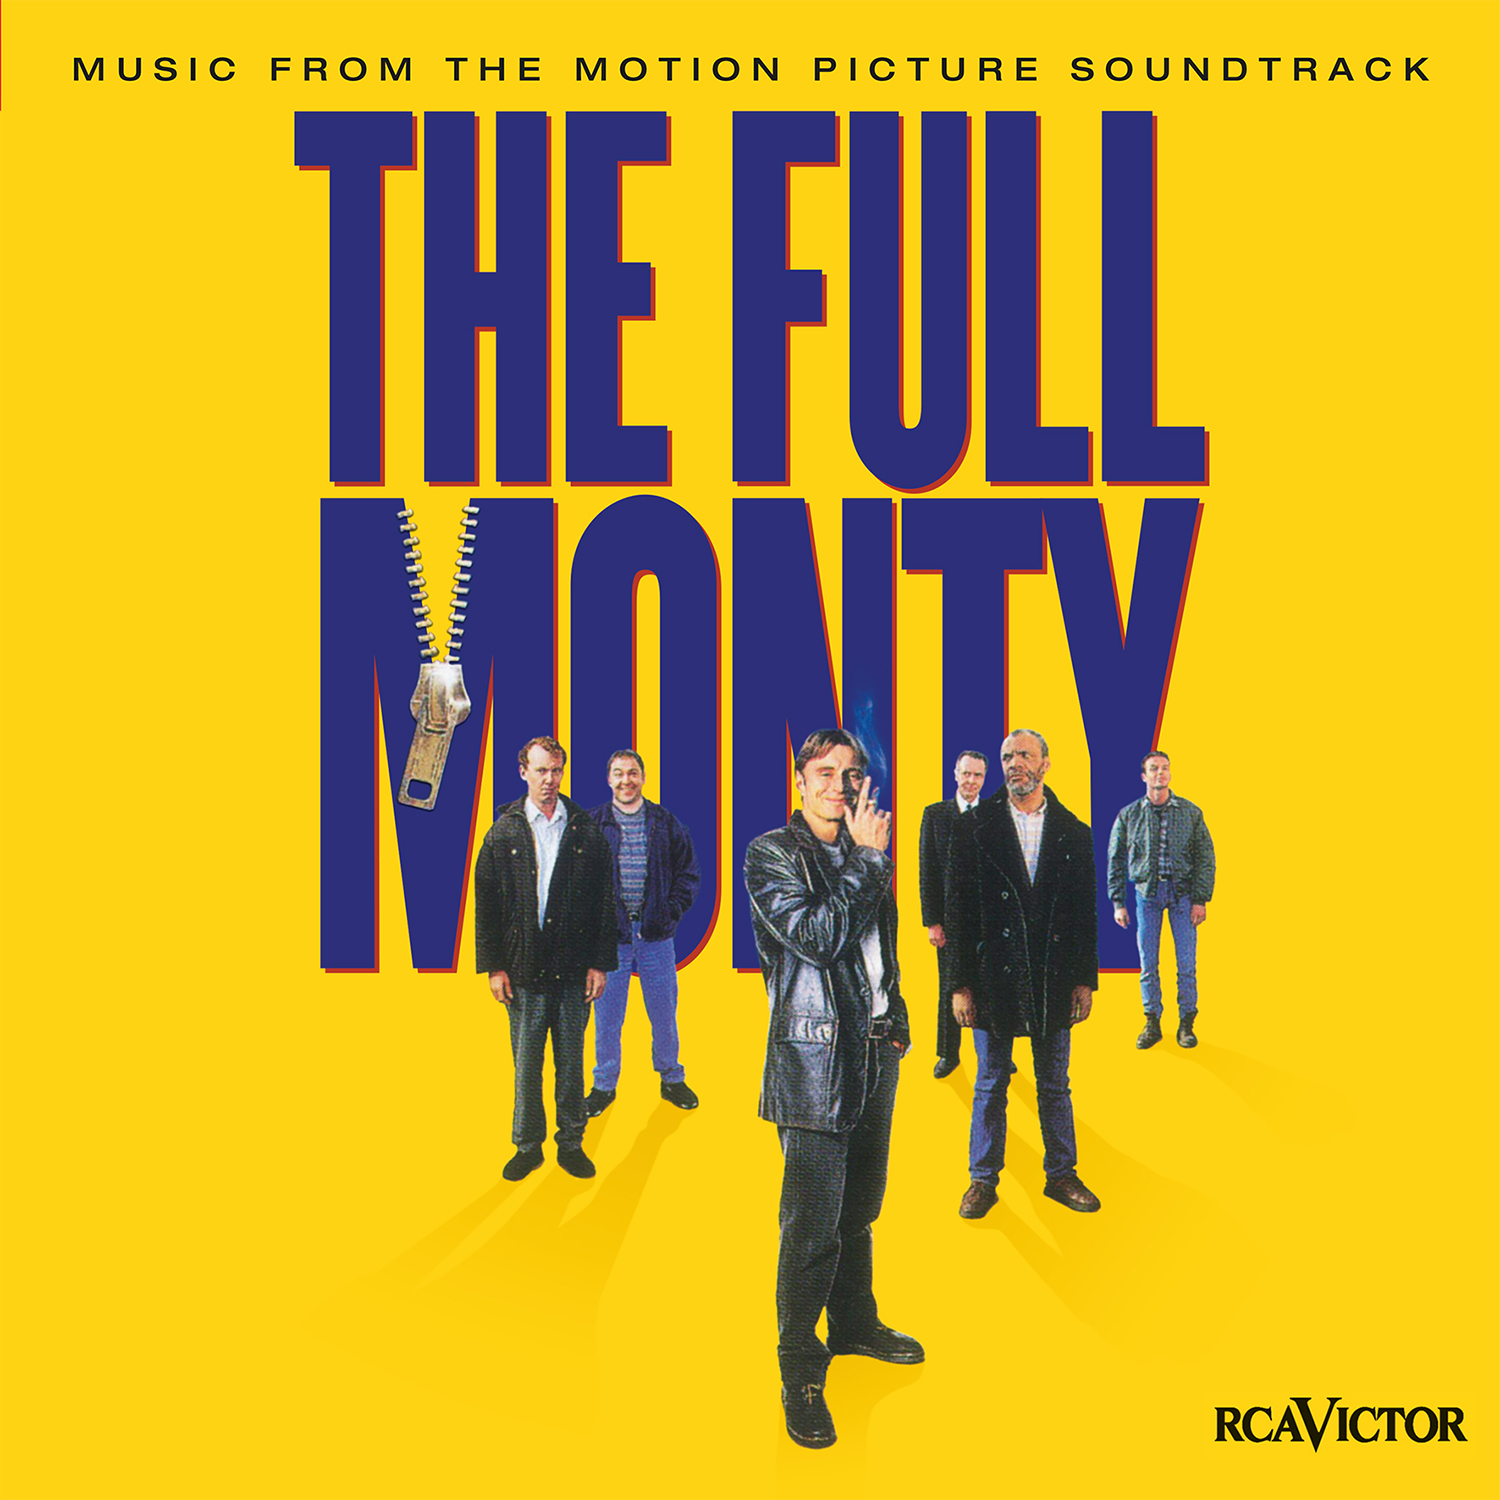 FULL MONTY - LP 180 GR. / 4 PAGE BOOKLET INCLUDES REPLICA OF ORIGINAL MOVIE POS